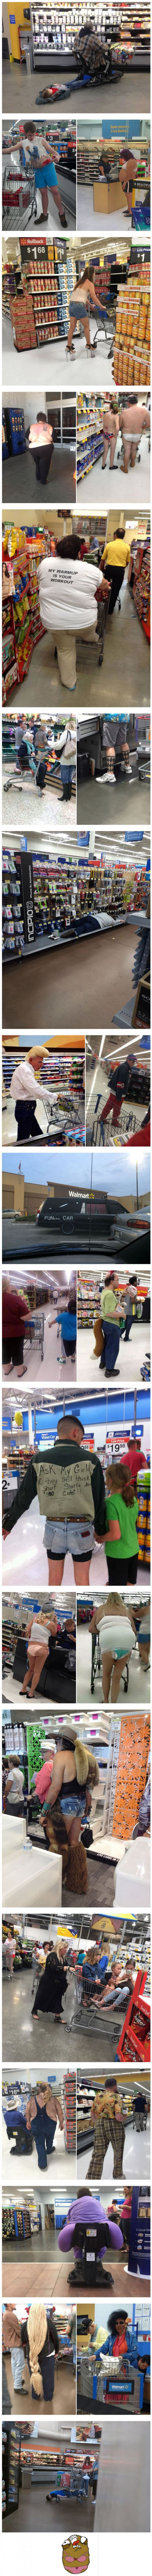 26 WTF Moments That Could Only Happen At Walmart